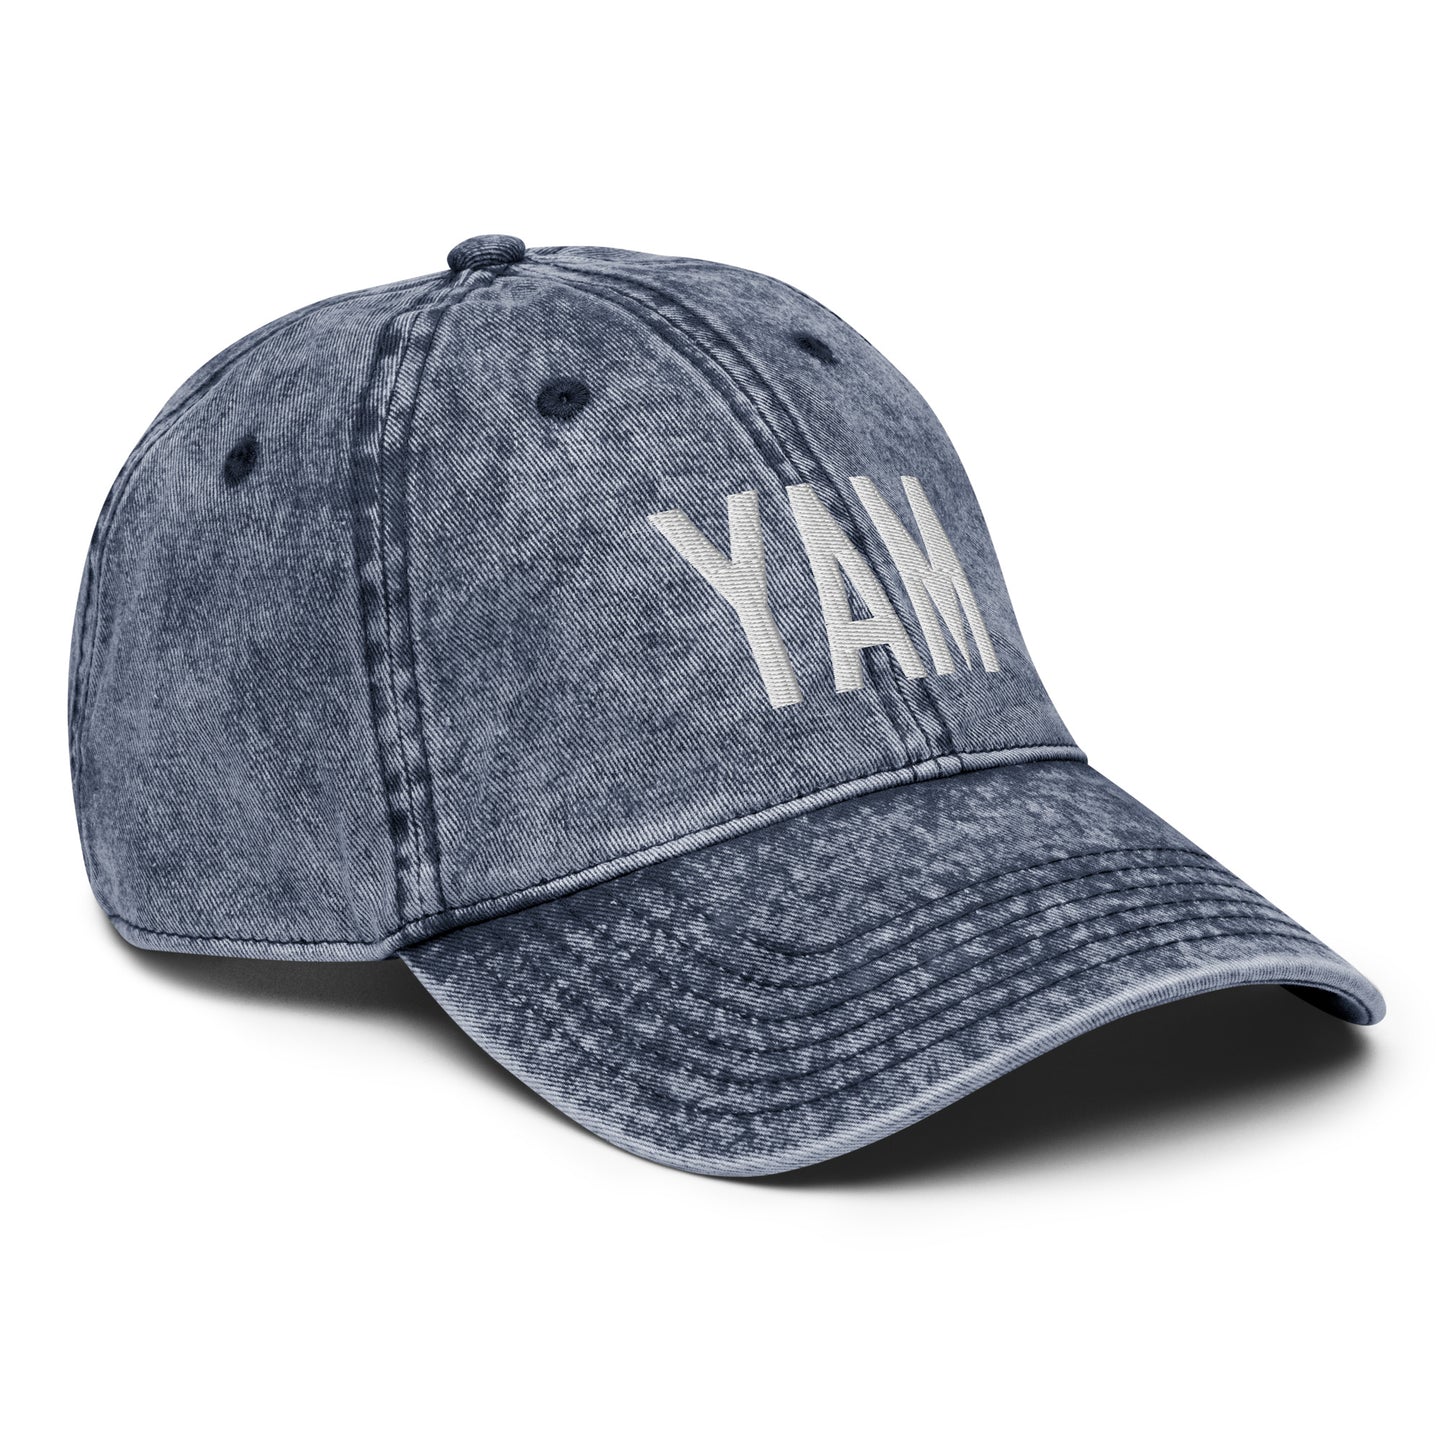 Airport Code Twill Cap - White • YAM Sault-Ste-Marie • YHM Designs - Image 18